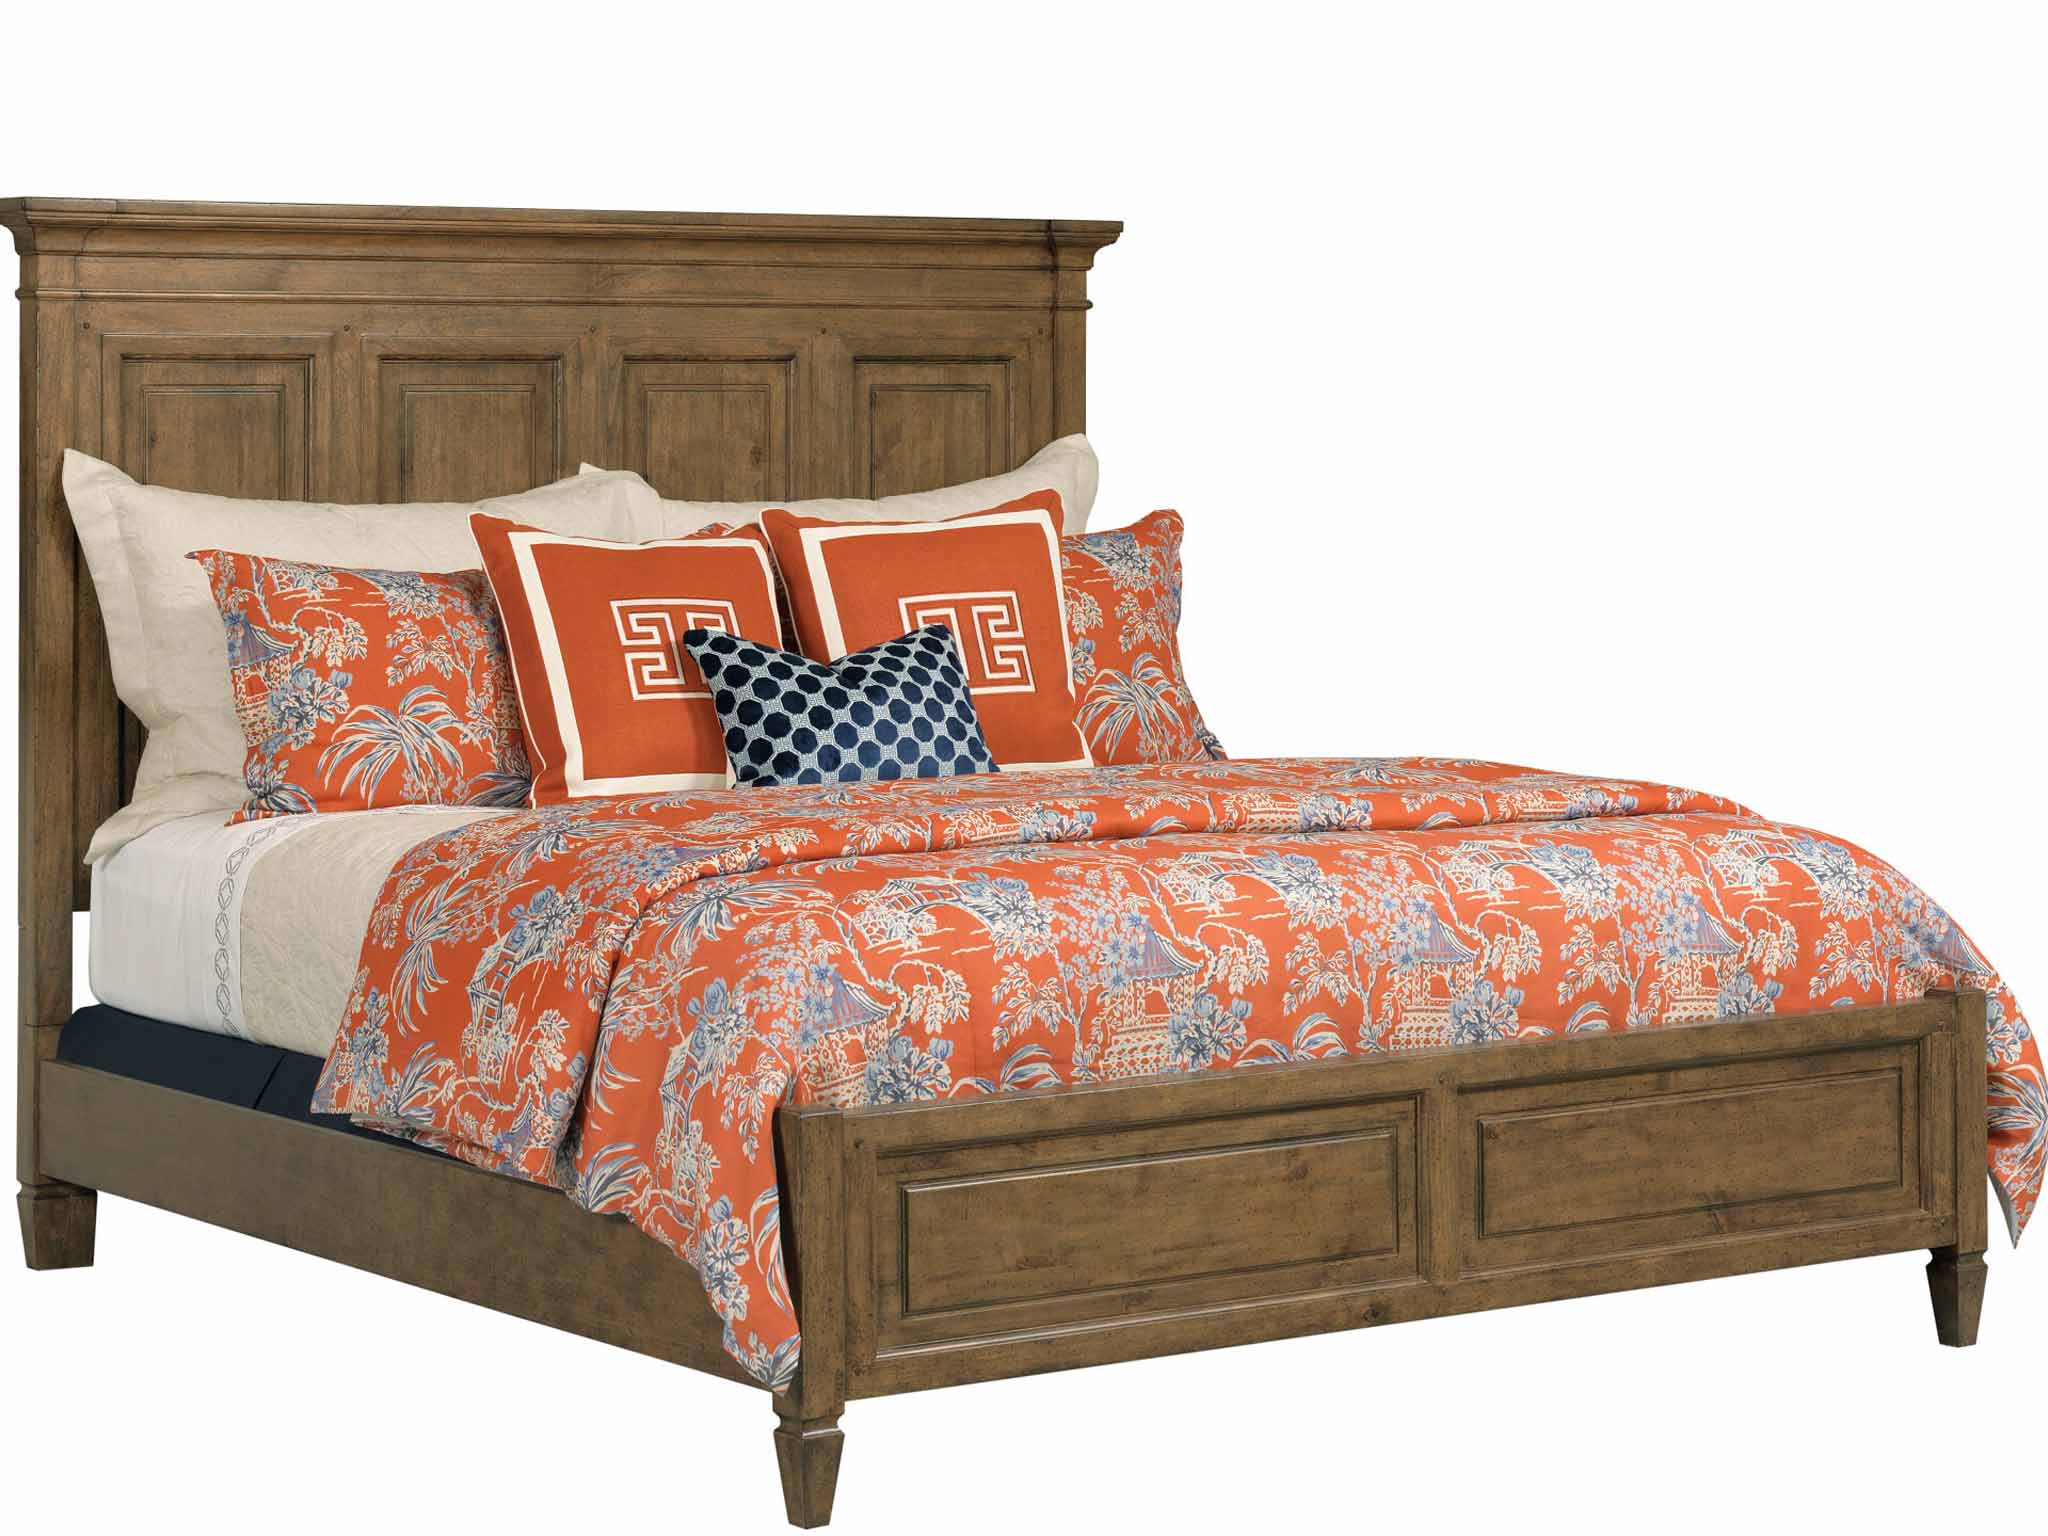 Kincaid 024-306P Ansley Hartnell King Panel Bed - Complete